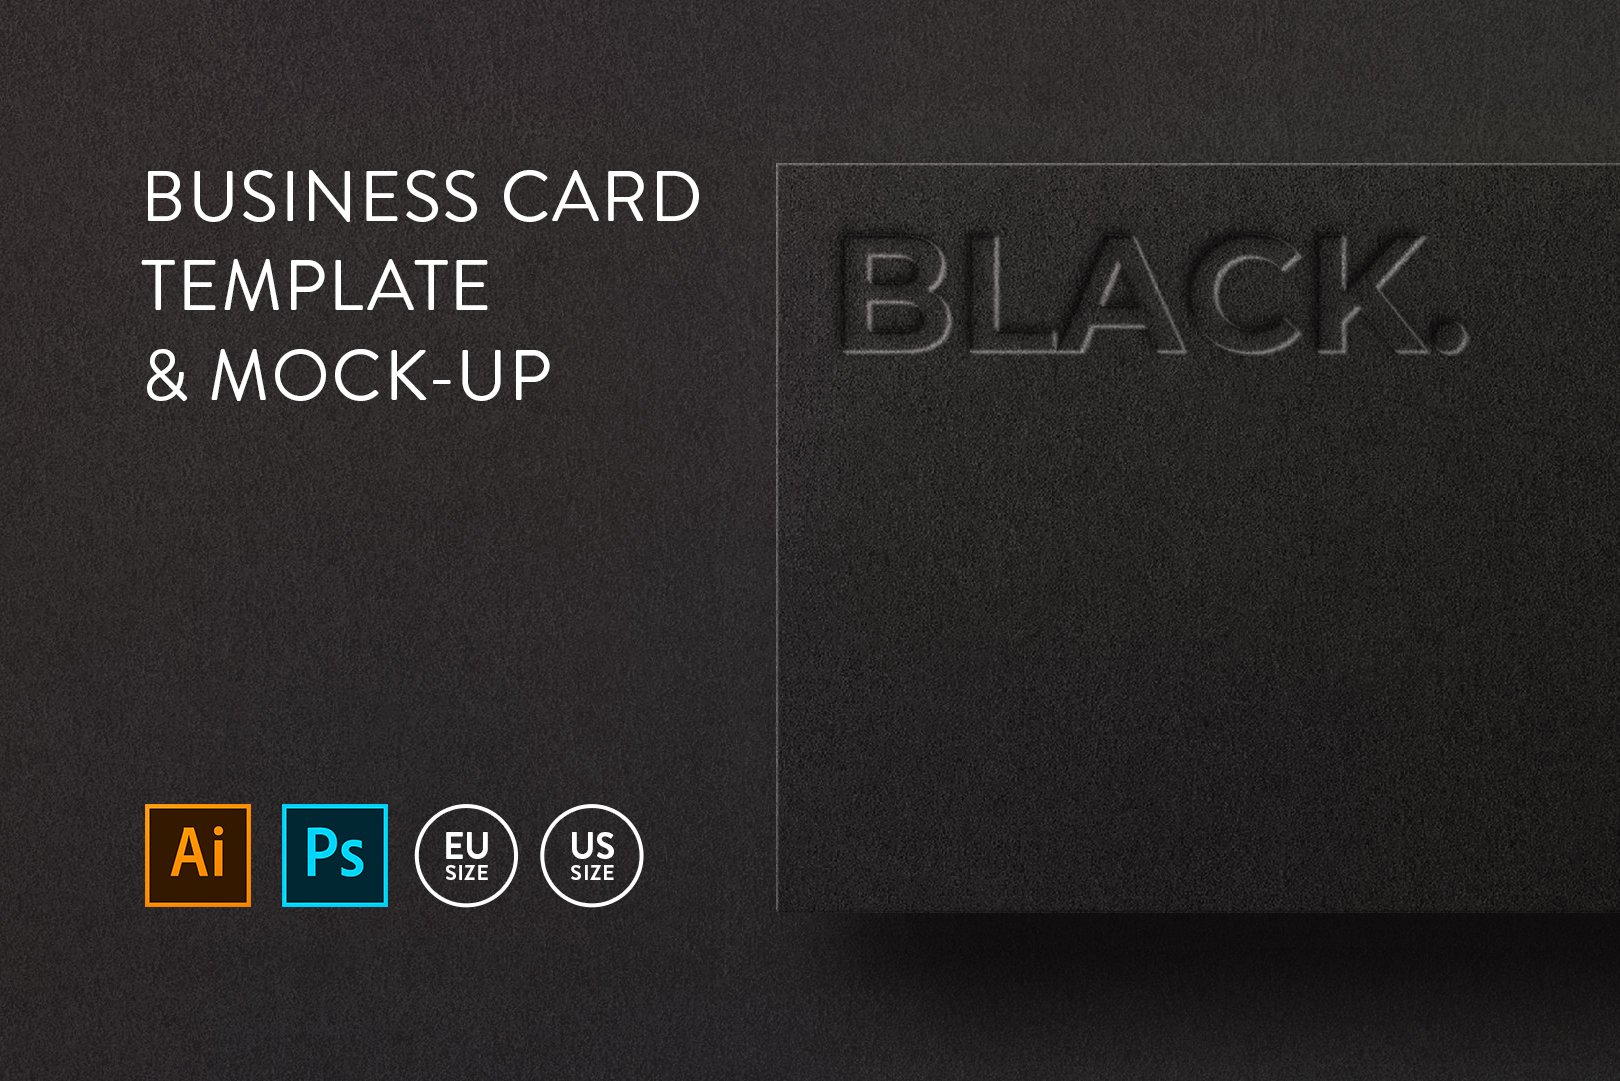 Business card Template & Mock-up cover image.